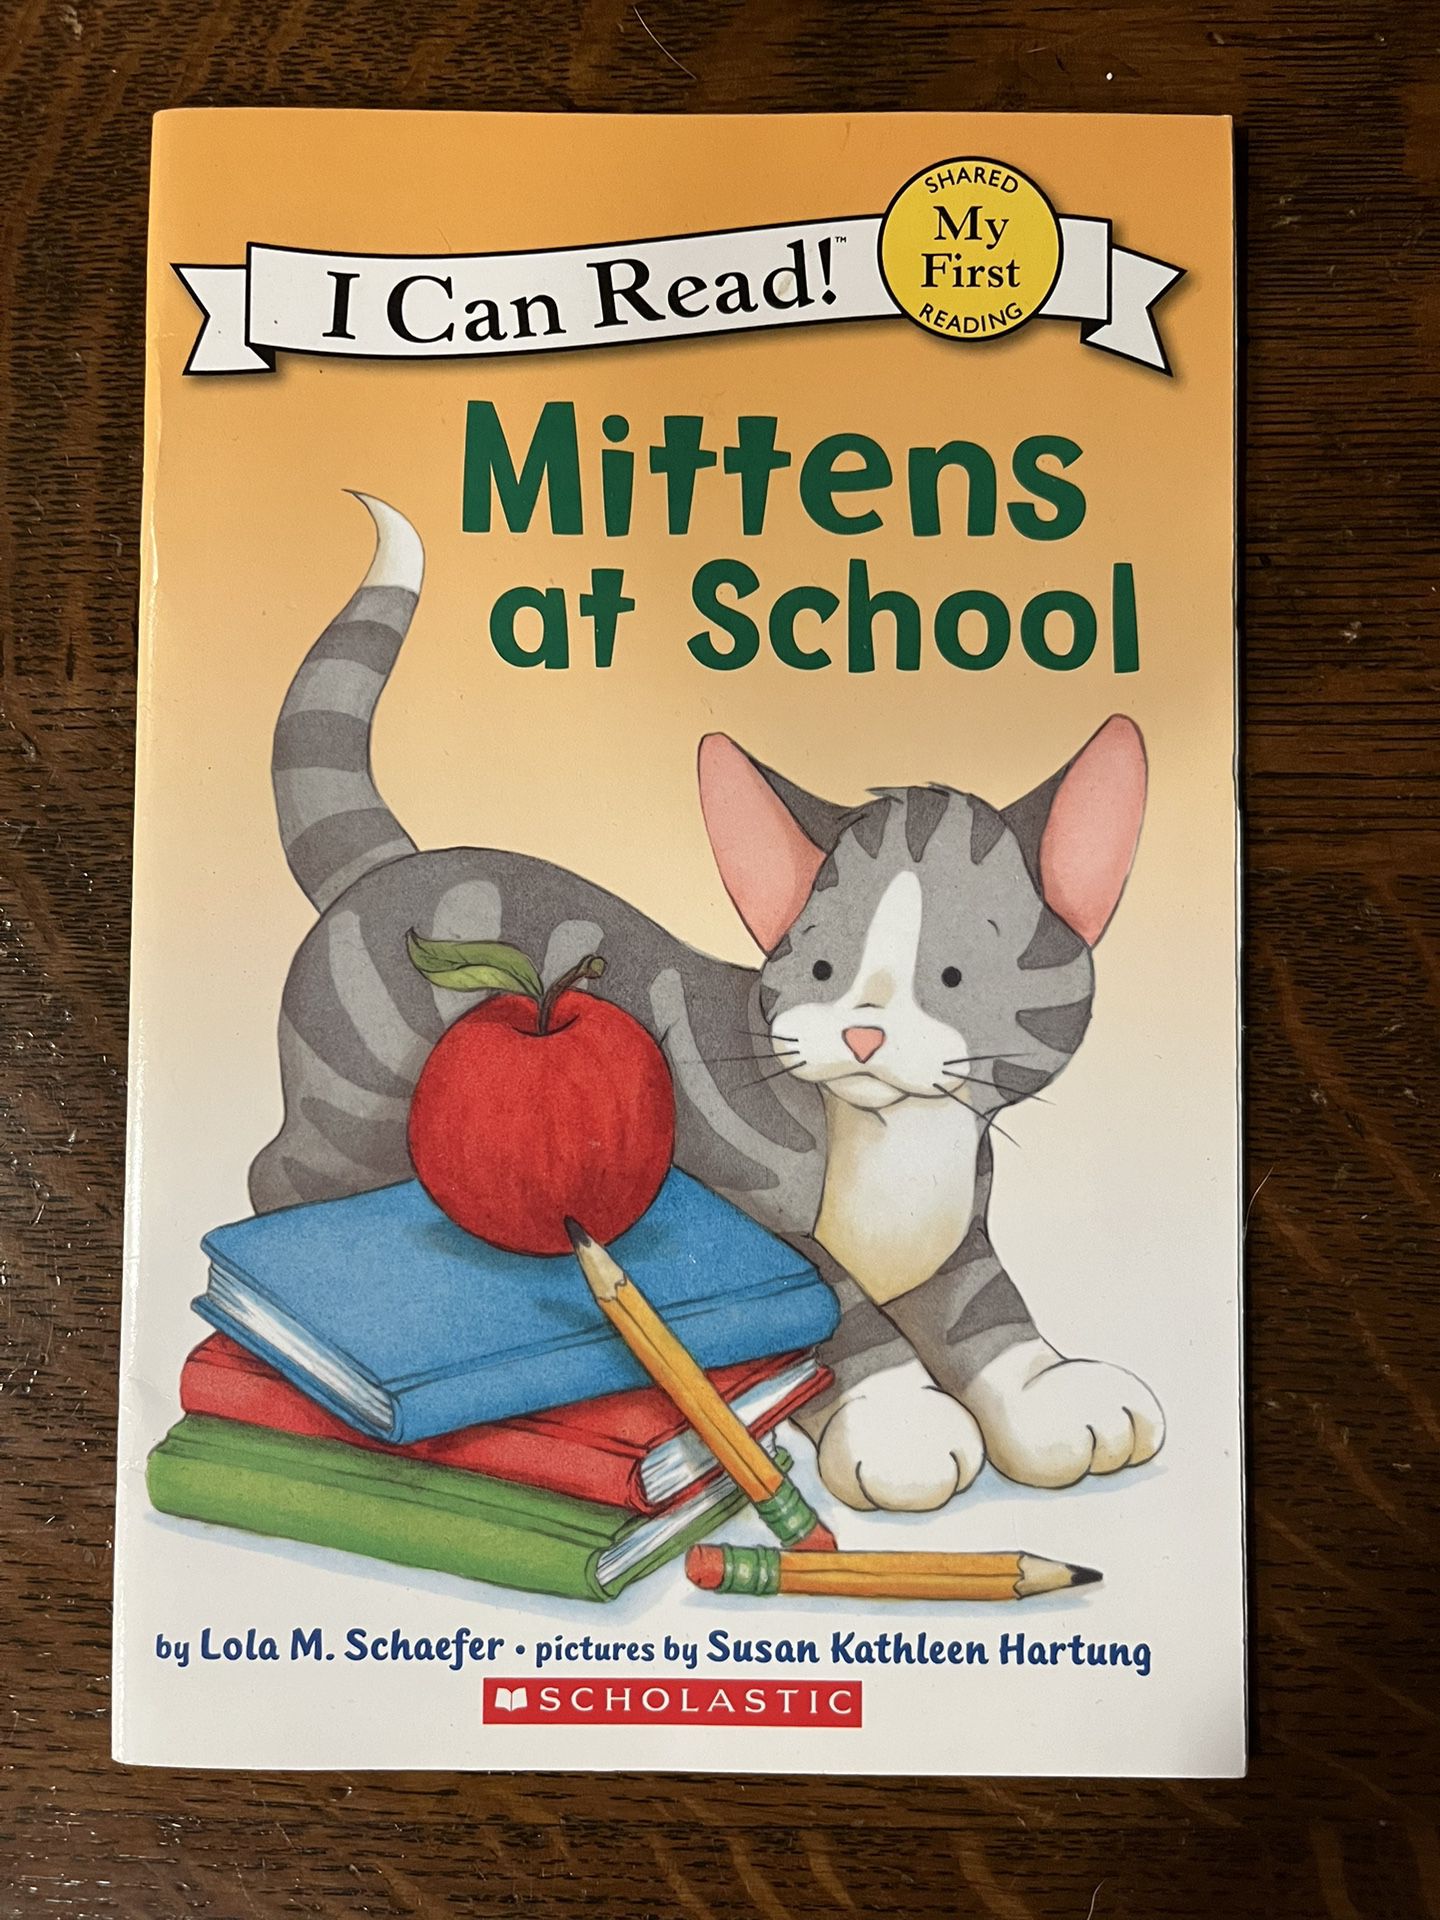 I Can Read! Mittens at School by Lola M. Schafer